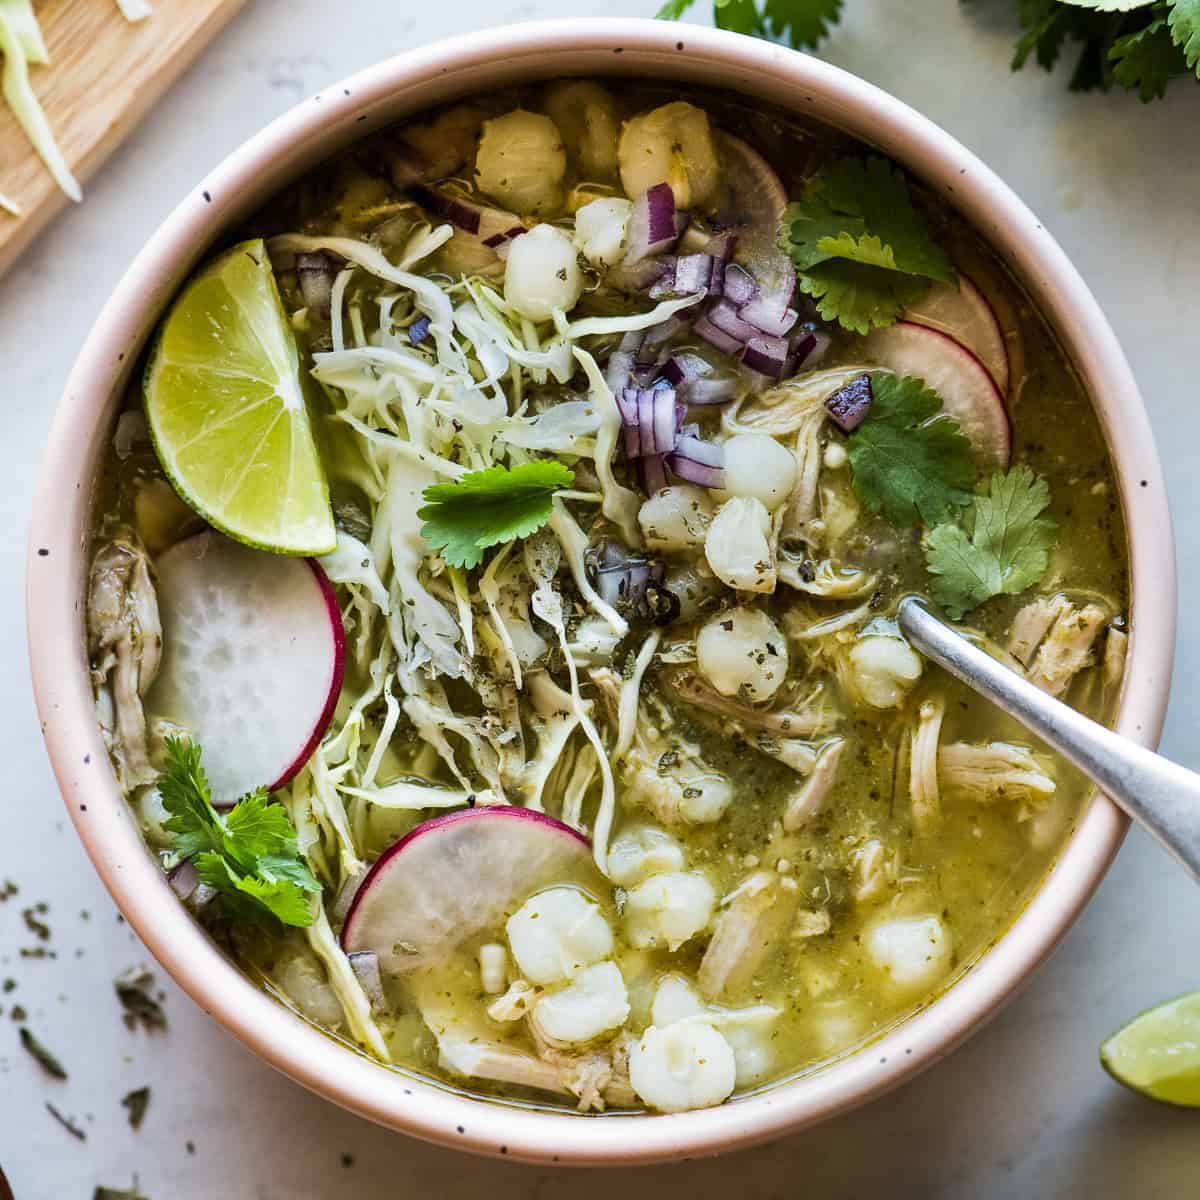 Chicken pozole verde in a bowl with various toppings like shredded cabbage, cilantro, sliced radishes, and diced red onions.